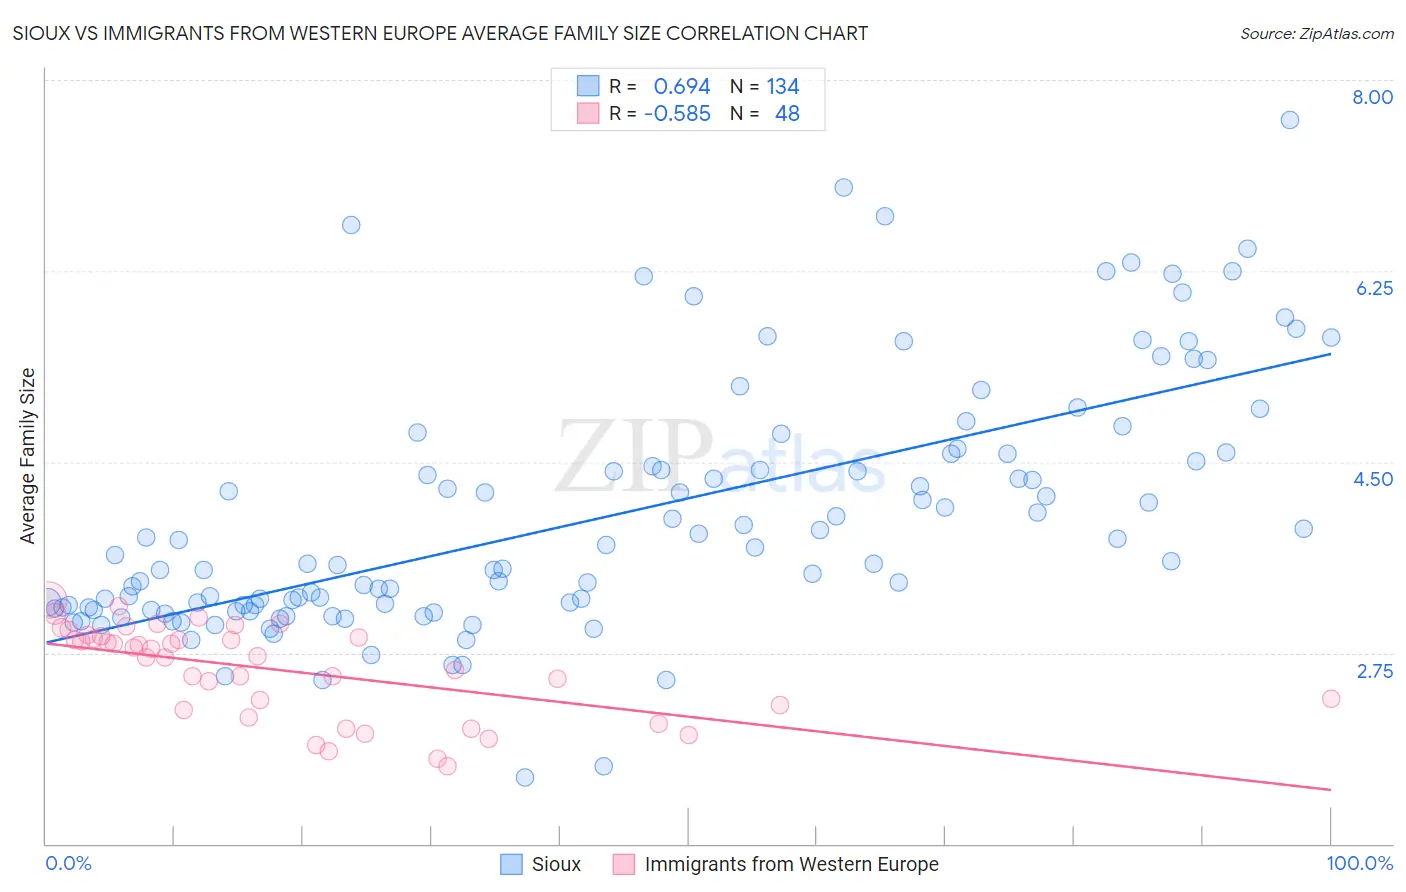 Sioux vs Immigrants from Western Europe Average Family Size